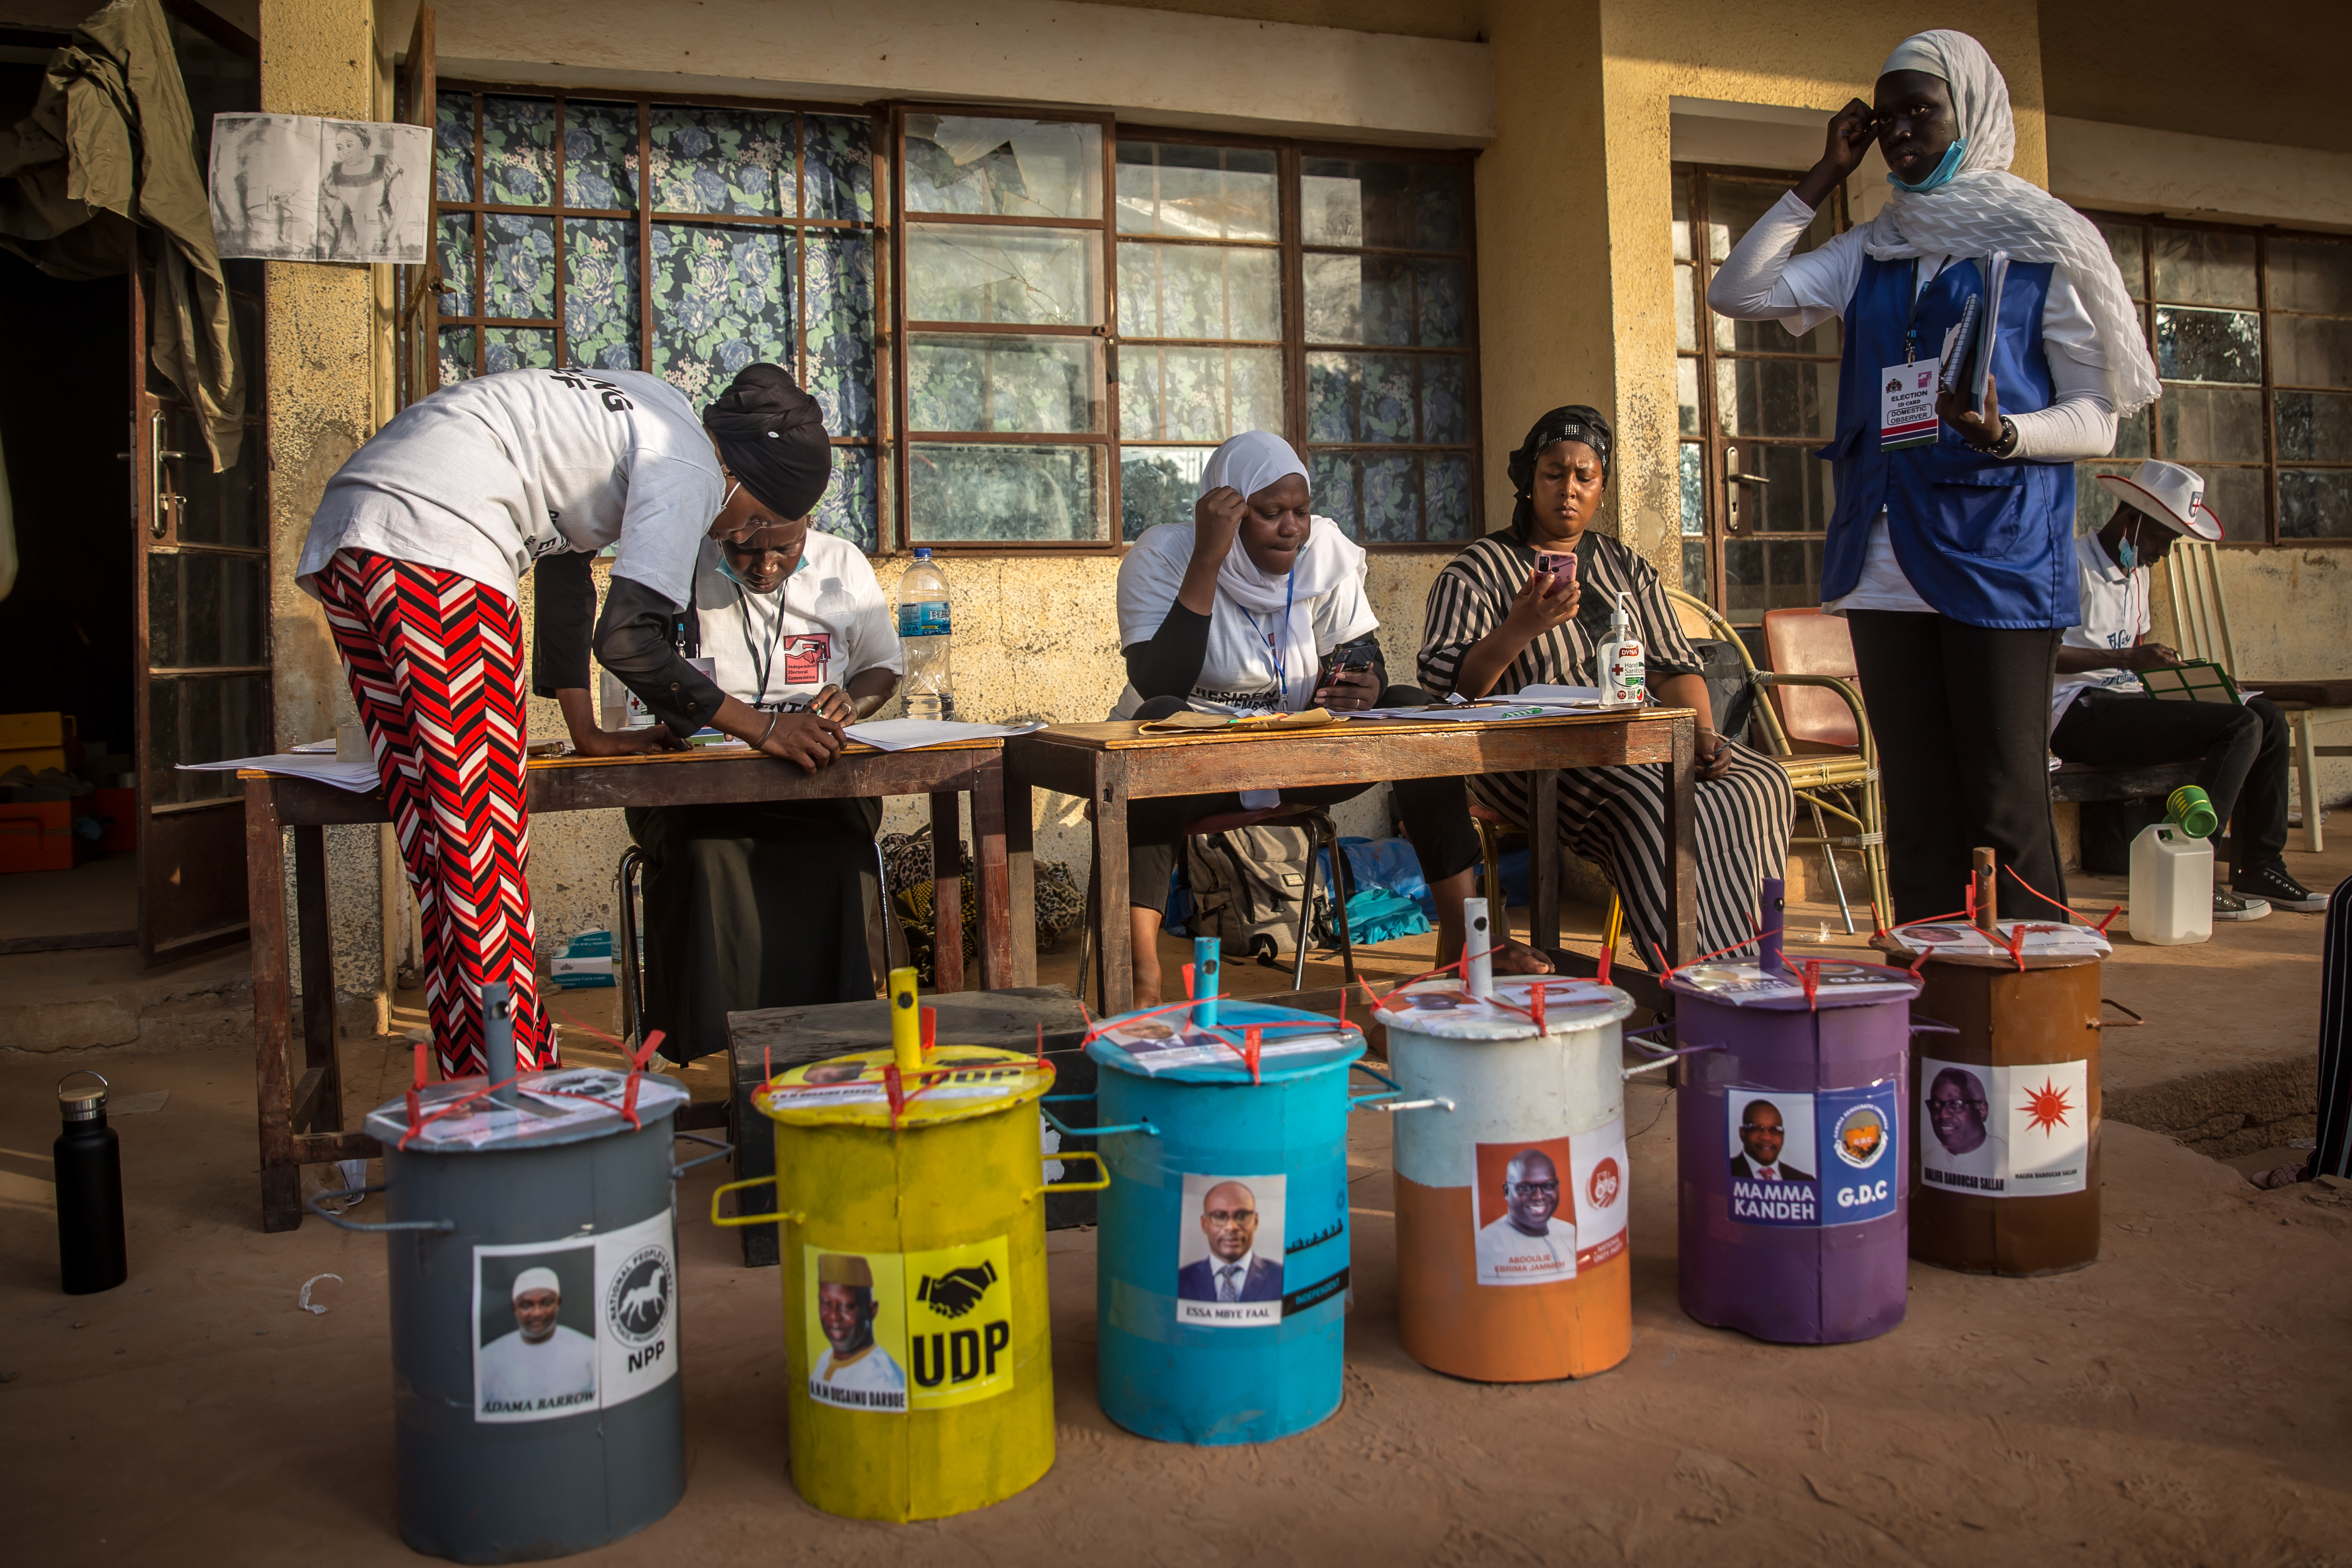 Officials at a polling station prepare to count votes in The Gambia’s presidential election (2021). This was the first presidential election in The Gambia since the long-standing dictator Yahya Jammeh was ousted from power in 2017. Credit: Sally Hayden / SOPA Images/Sipa USA